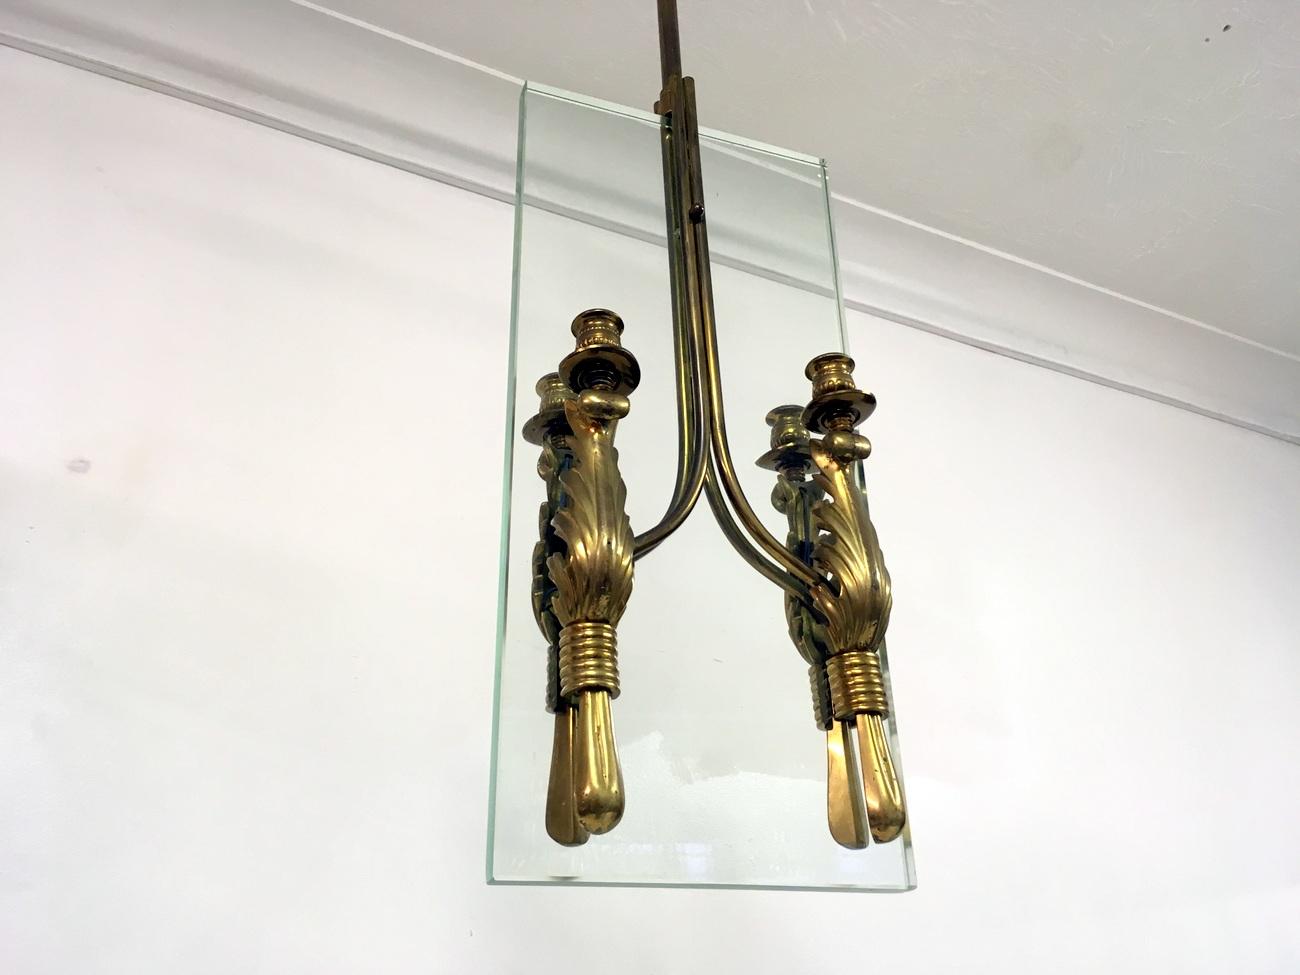 Midcentury 1950s Italian Brass and Glass Ceiling Light In Good Condition For Sale In London, London